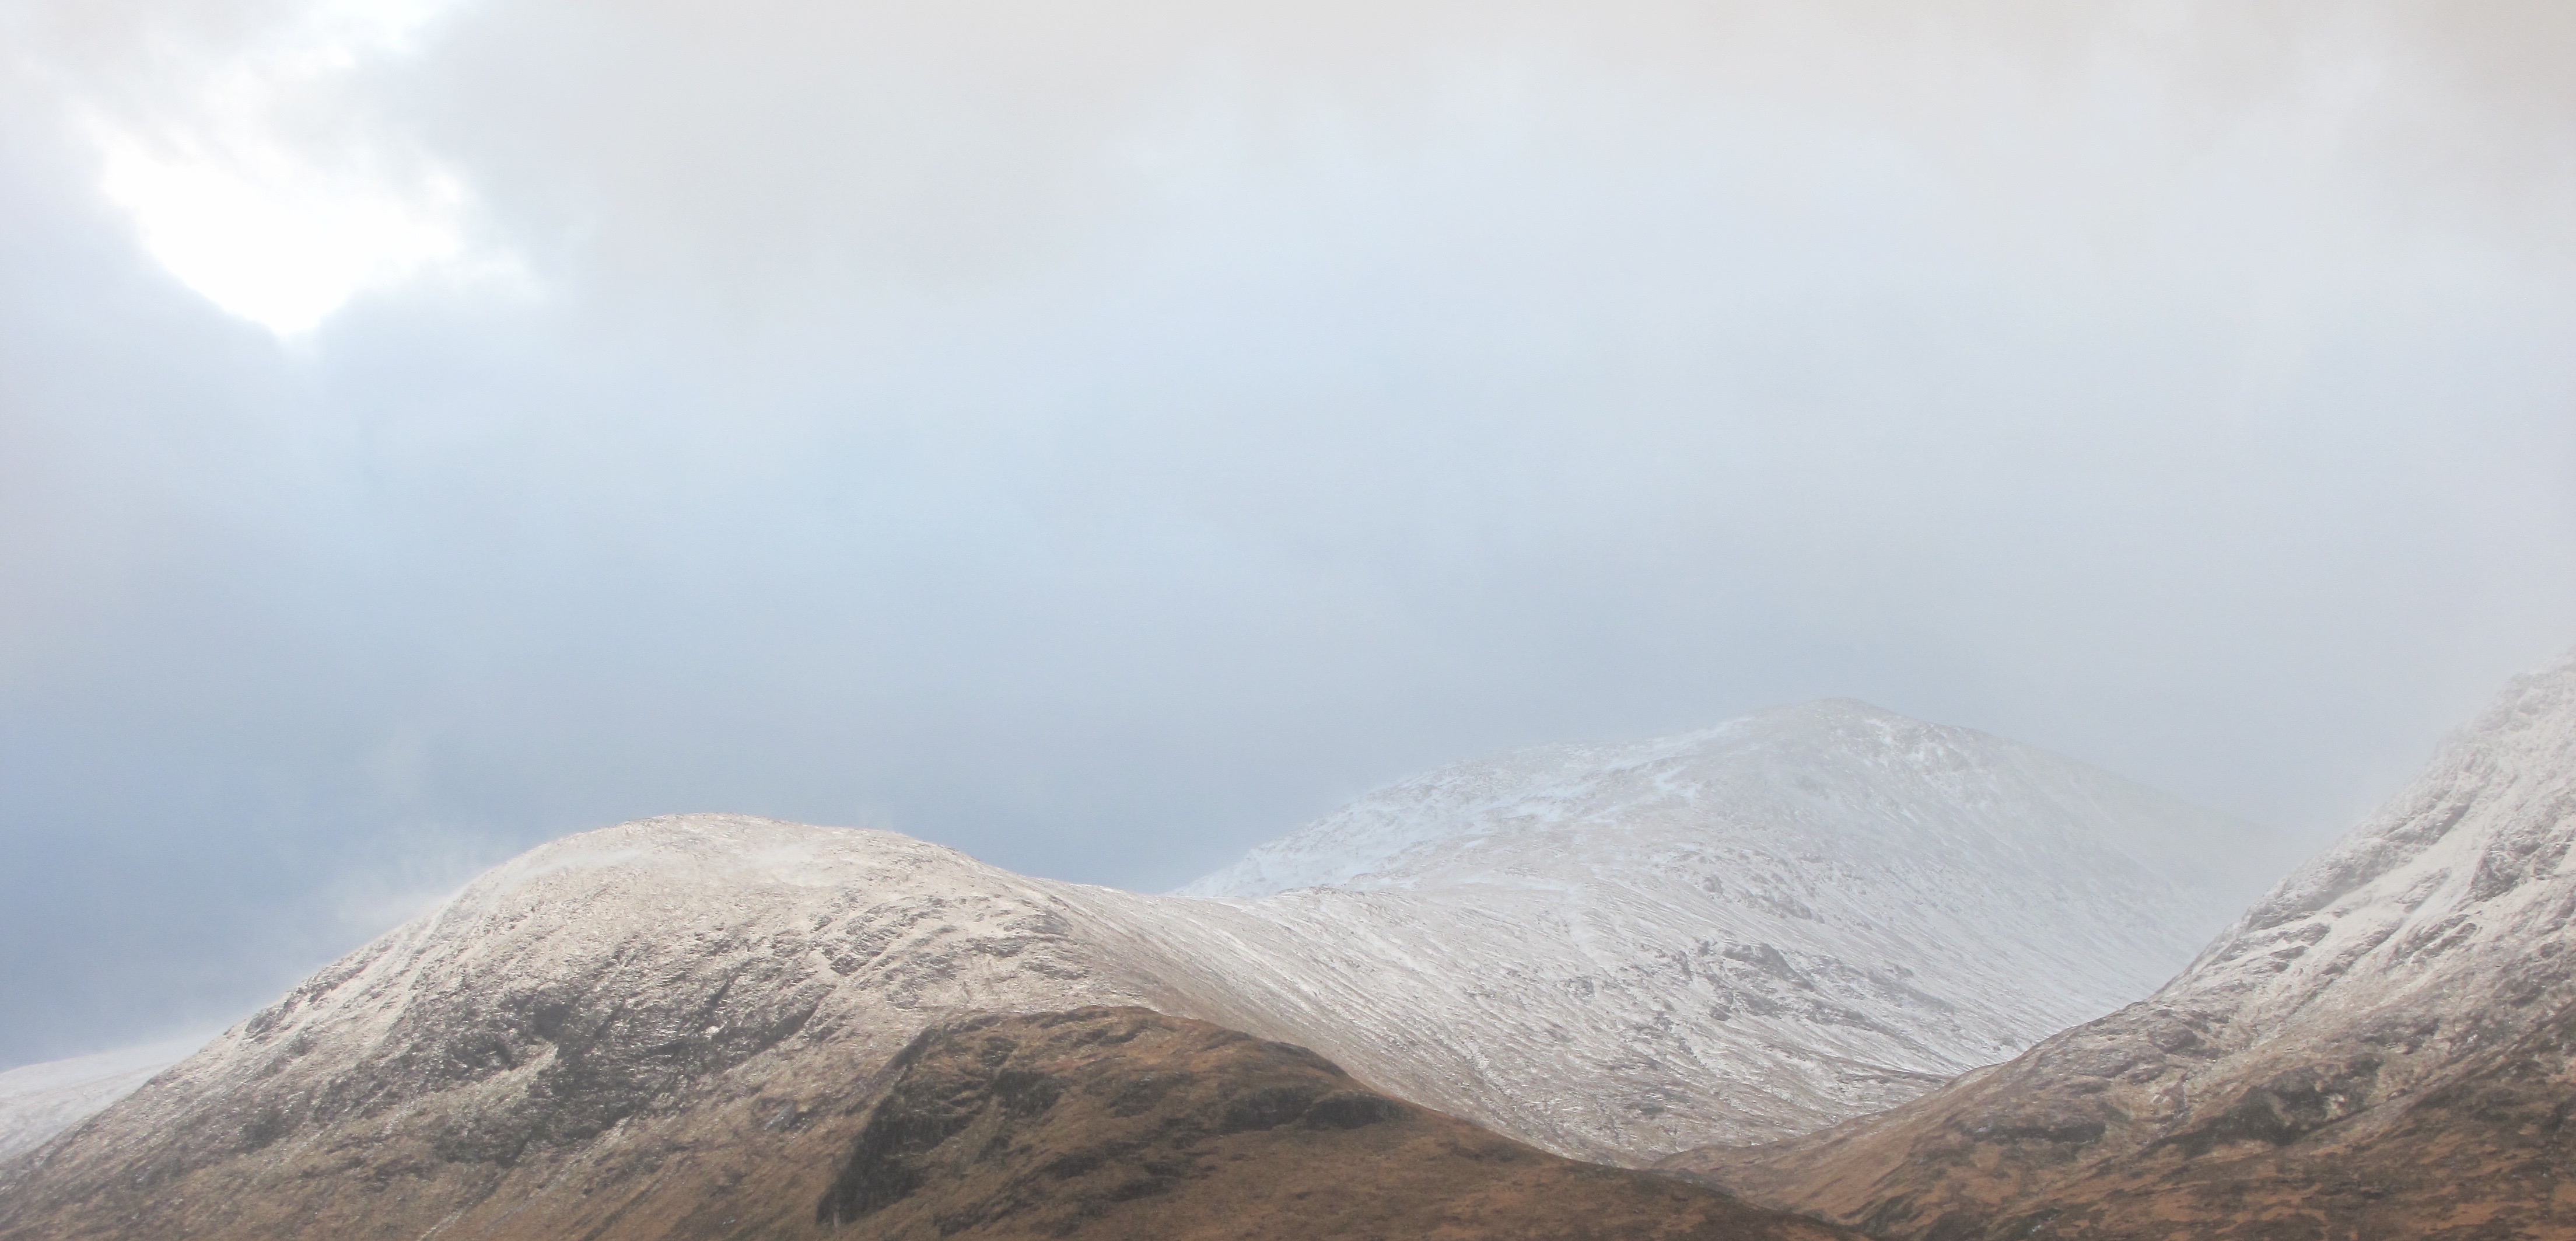 Meall a Bhuiridh - note the wind blowing the snow off Creag Dhubh